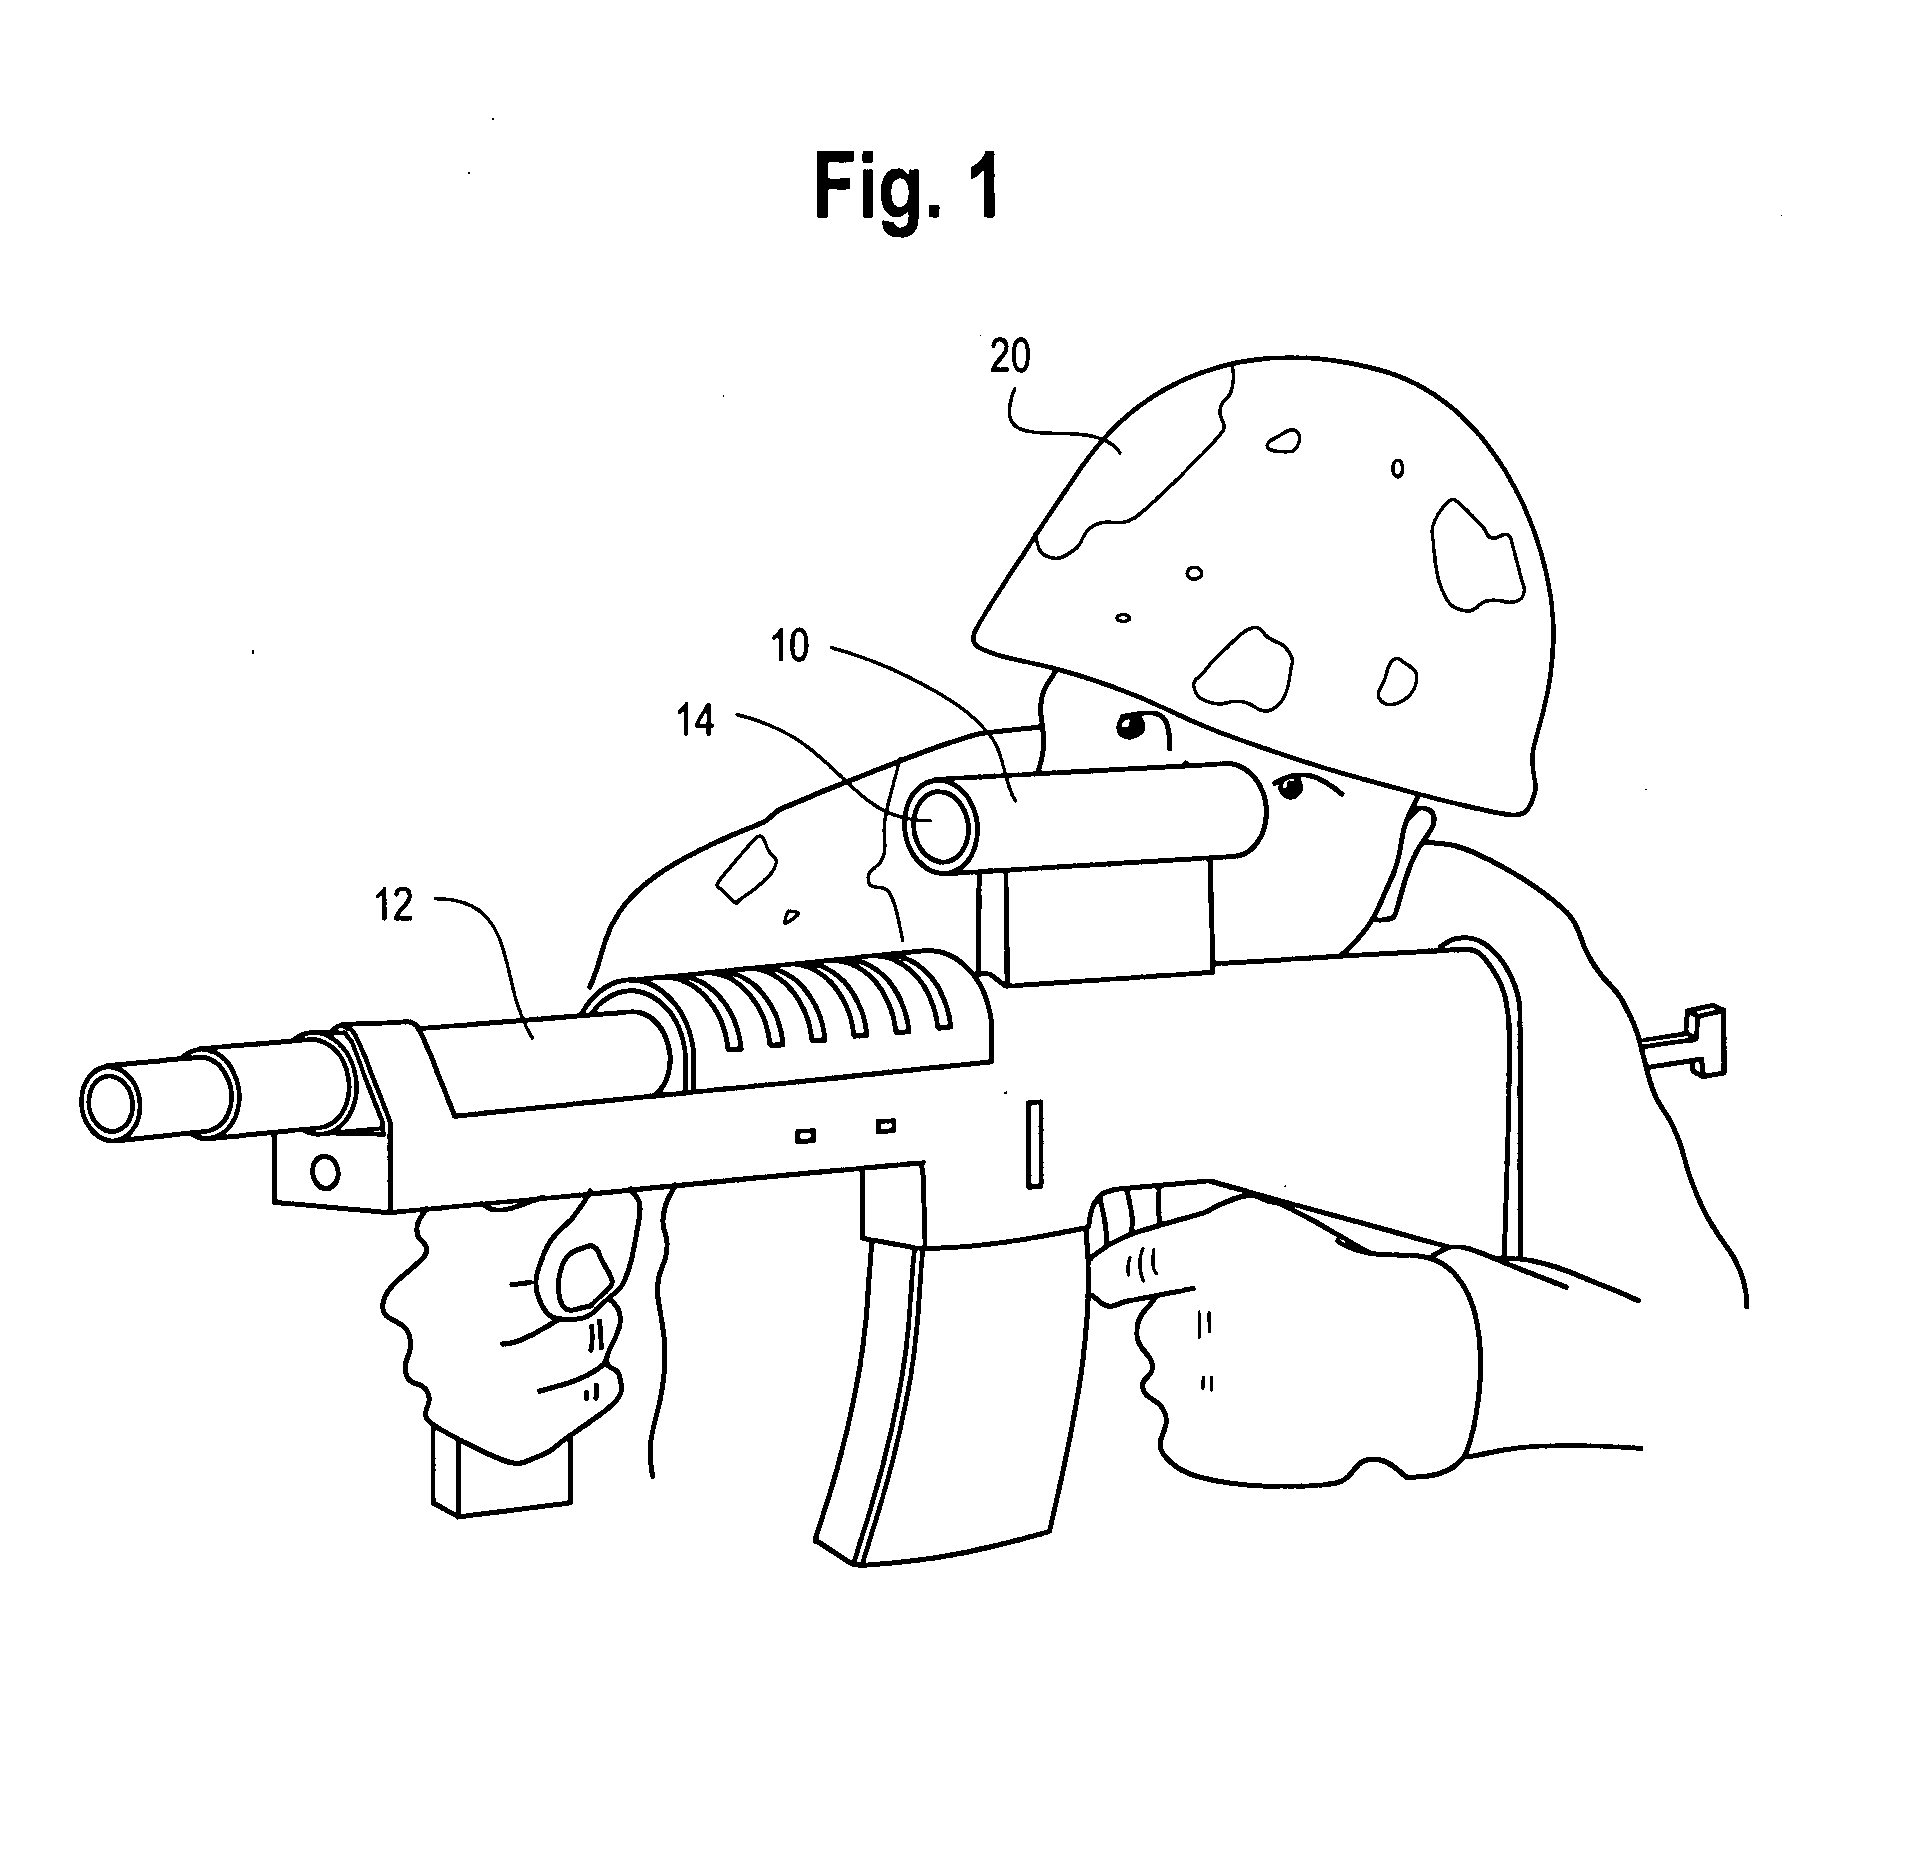 Compact two-element infrared objective lens and IR or thermal sight for weapon having viewing optics